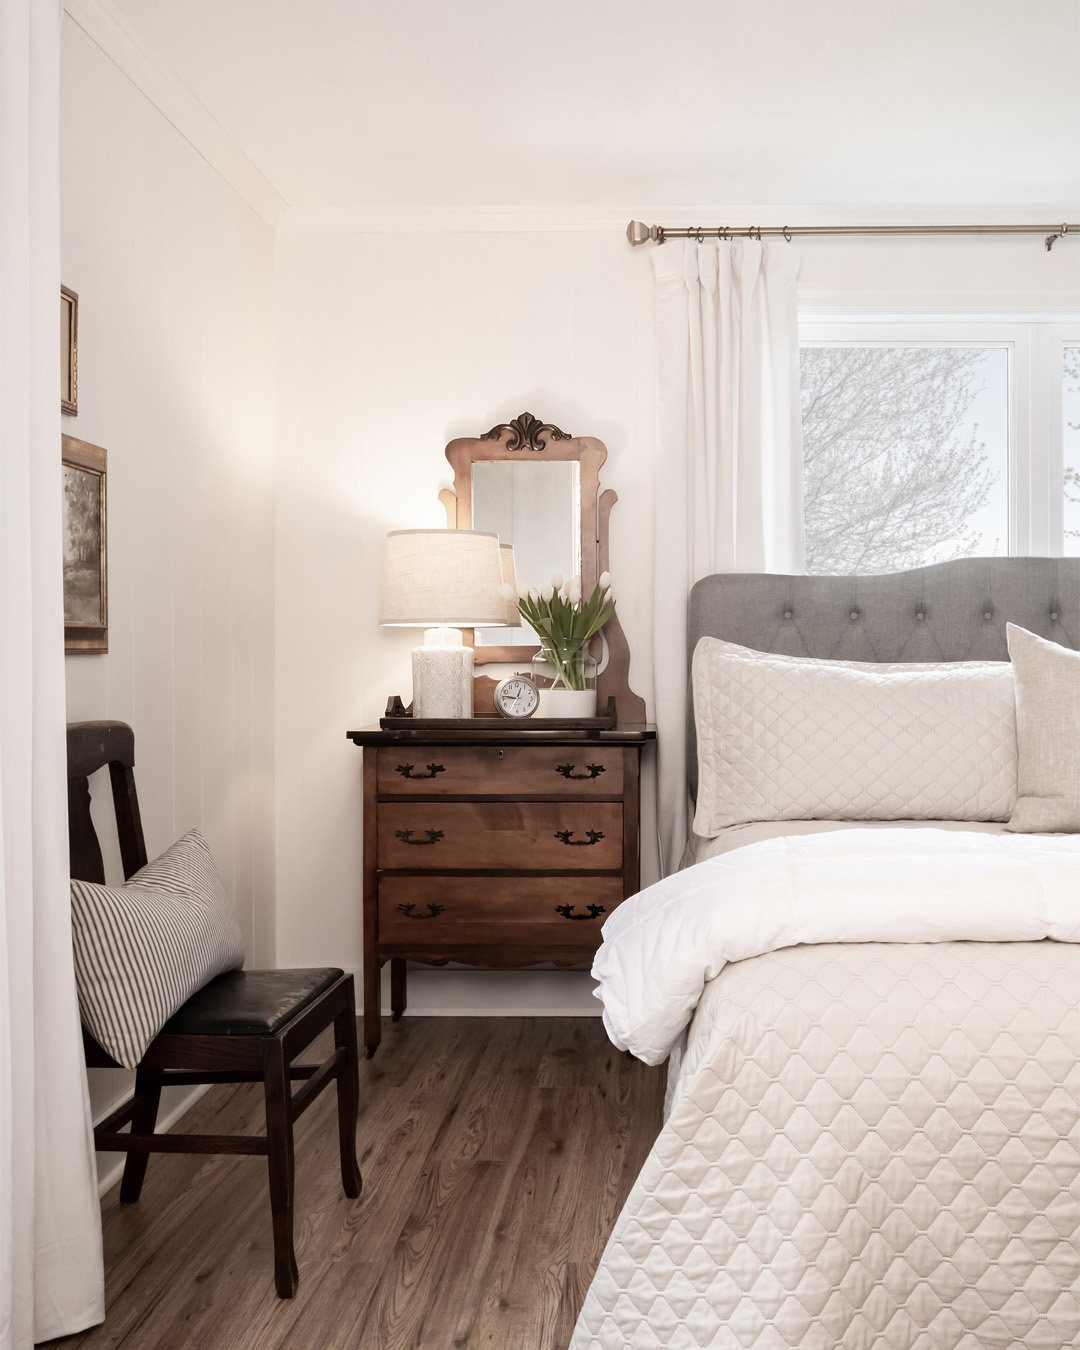 Come for a little tour of some of the updates we just finished up in our bedroom! It's the small design details that really make the biggest difference when it comes to creating a room that just feels right.